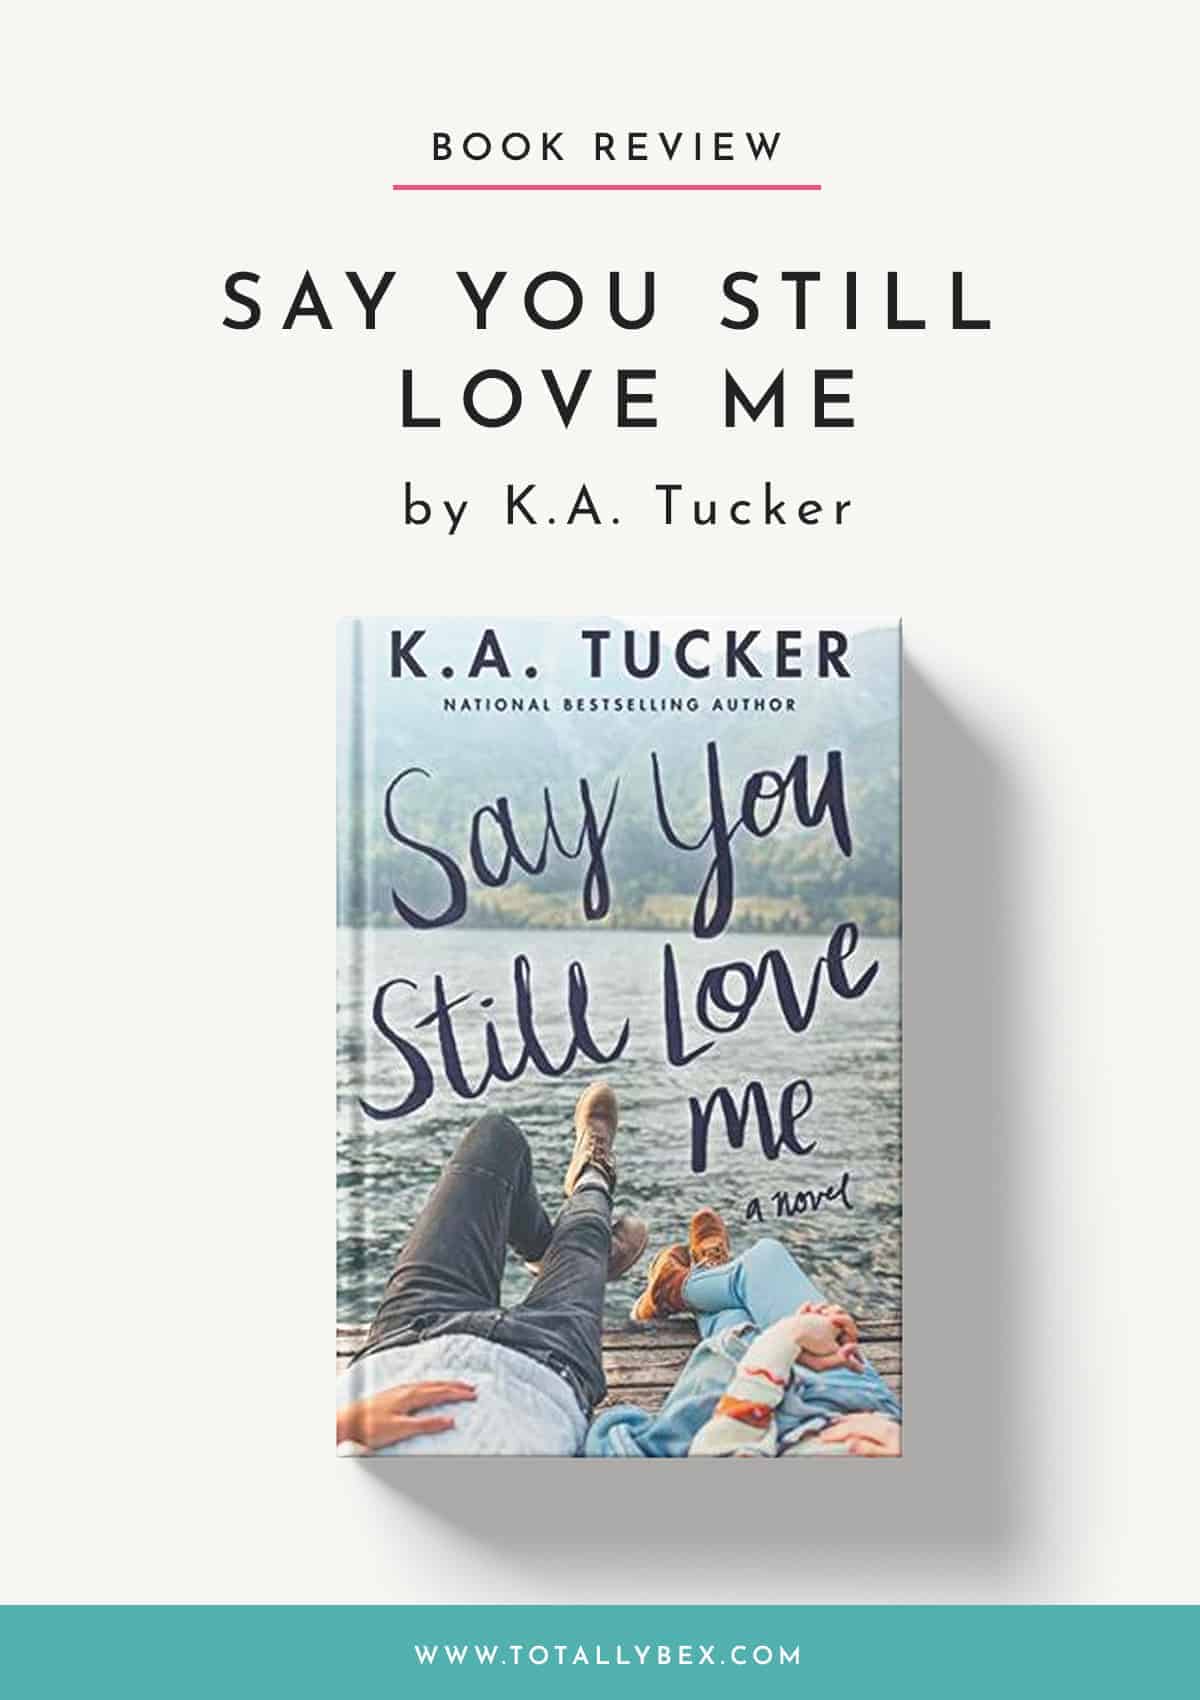 Say You Still Love Me by K.A. Tucker is an emotional and intriguing dual-timeline contemporary romance about first loves and second chances.